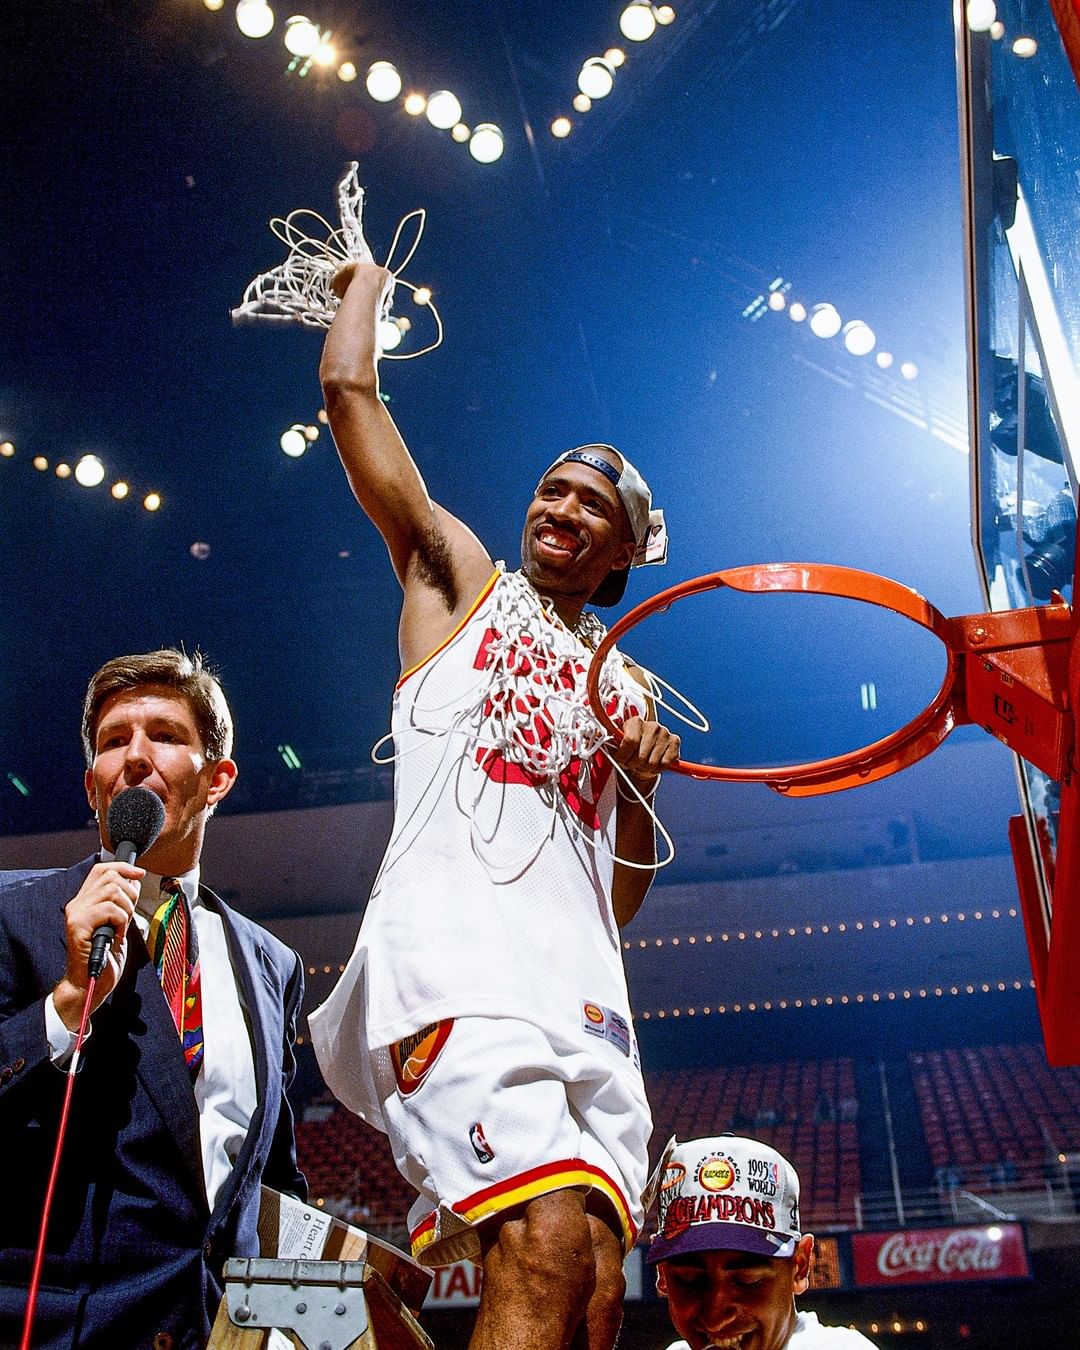 Join us in wishing 2x NBA Champ and Rockets Legend Kenny “The Jet” Smith a Happy...